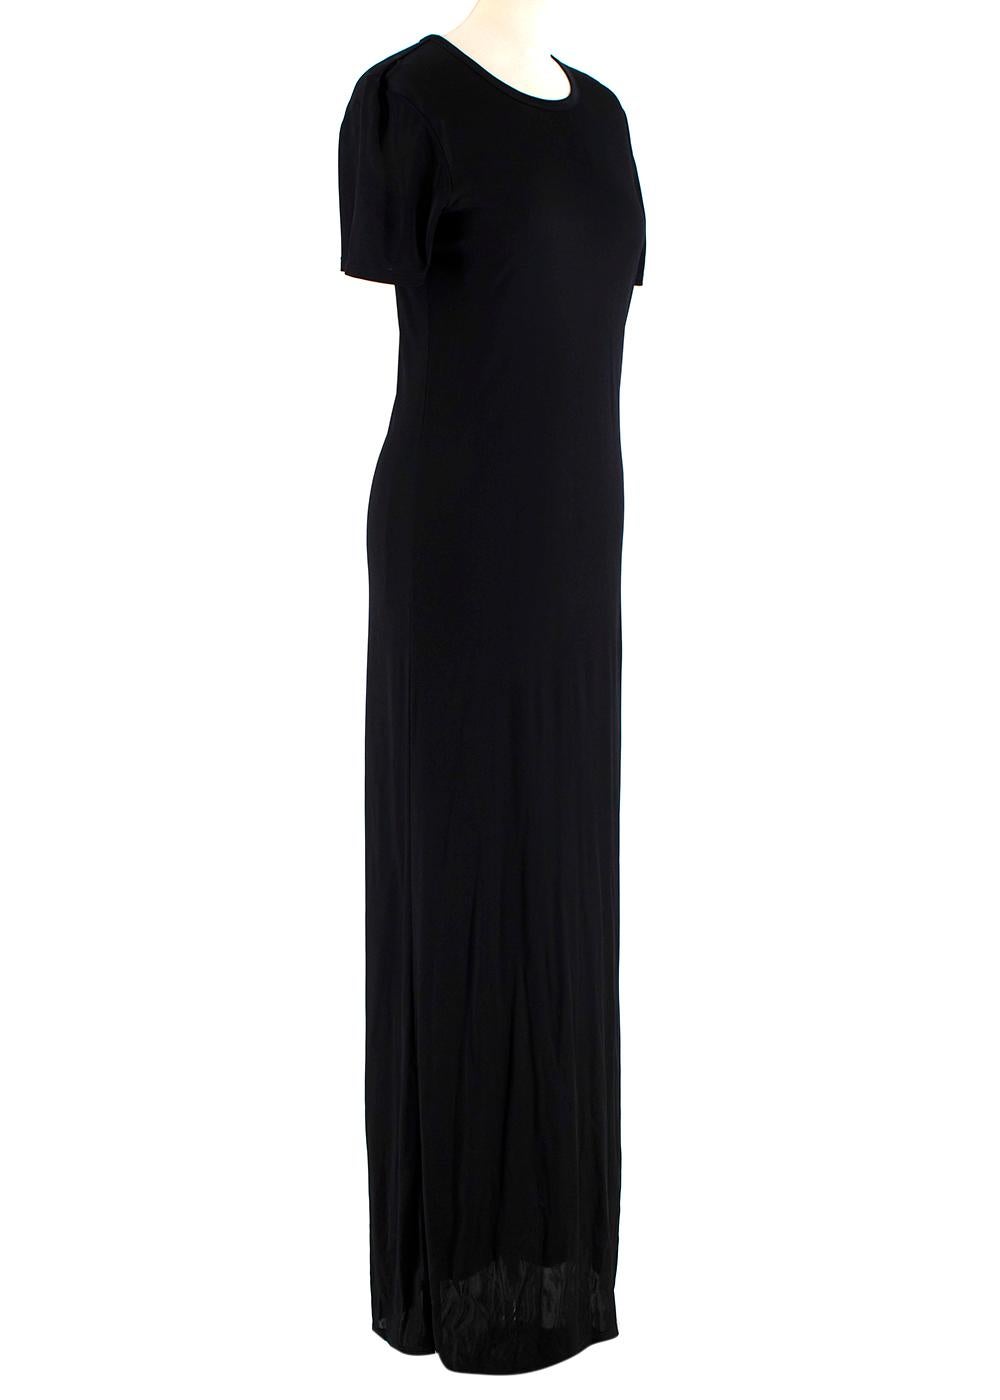 The Row Black Short Sleeve Maxi Dress

- Round neckline 
- Short sleeve 
- Maxi length

Materials
- 100% Viscose

Dry clean only

Made in USA

Approx
Measurements are taken laying flat, seam to seam. 
shoulder 40cm
sleeve 21cm
chest 41cm
waist